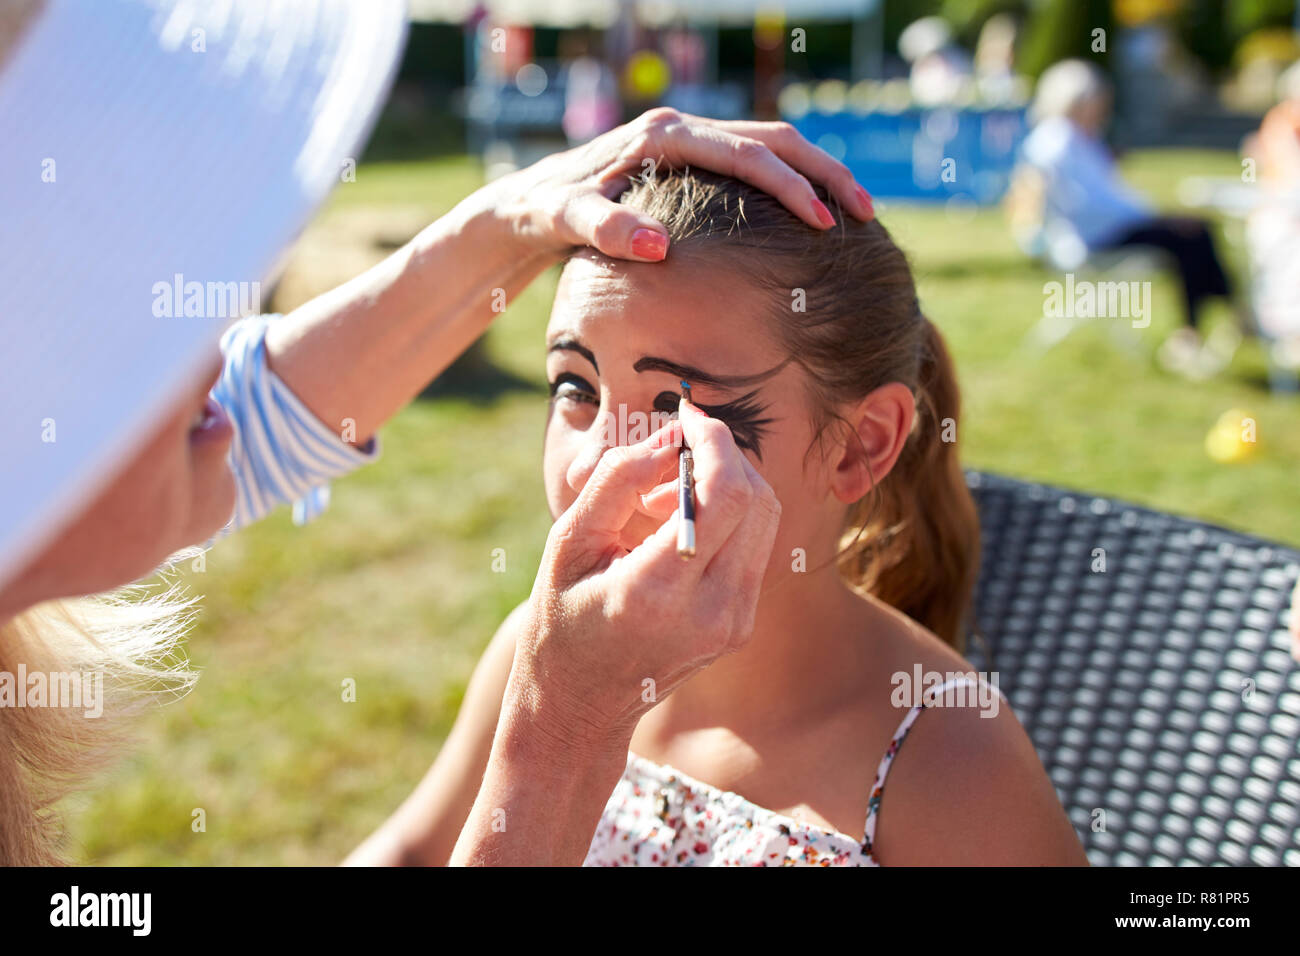 Girl At Face Painting Stall At Summer Garden Fete Stock Photo